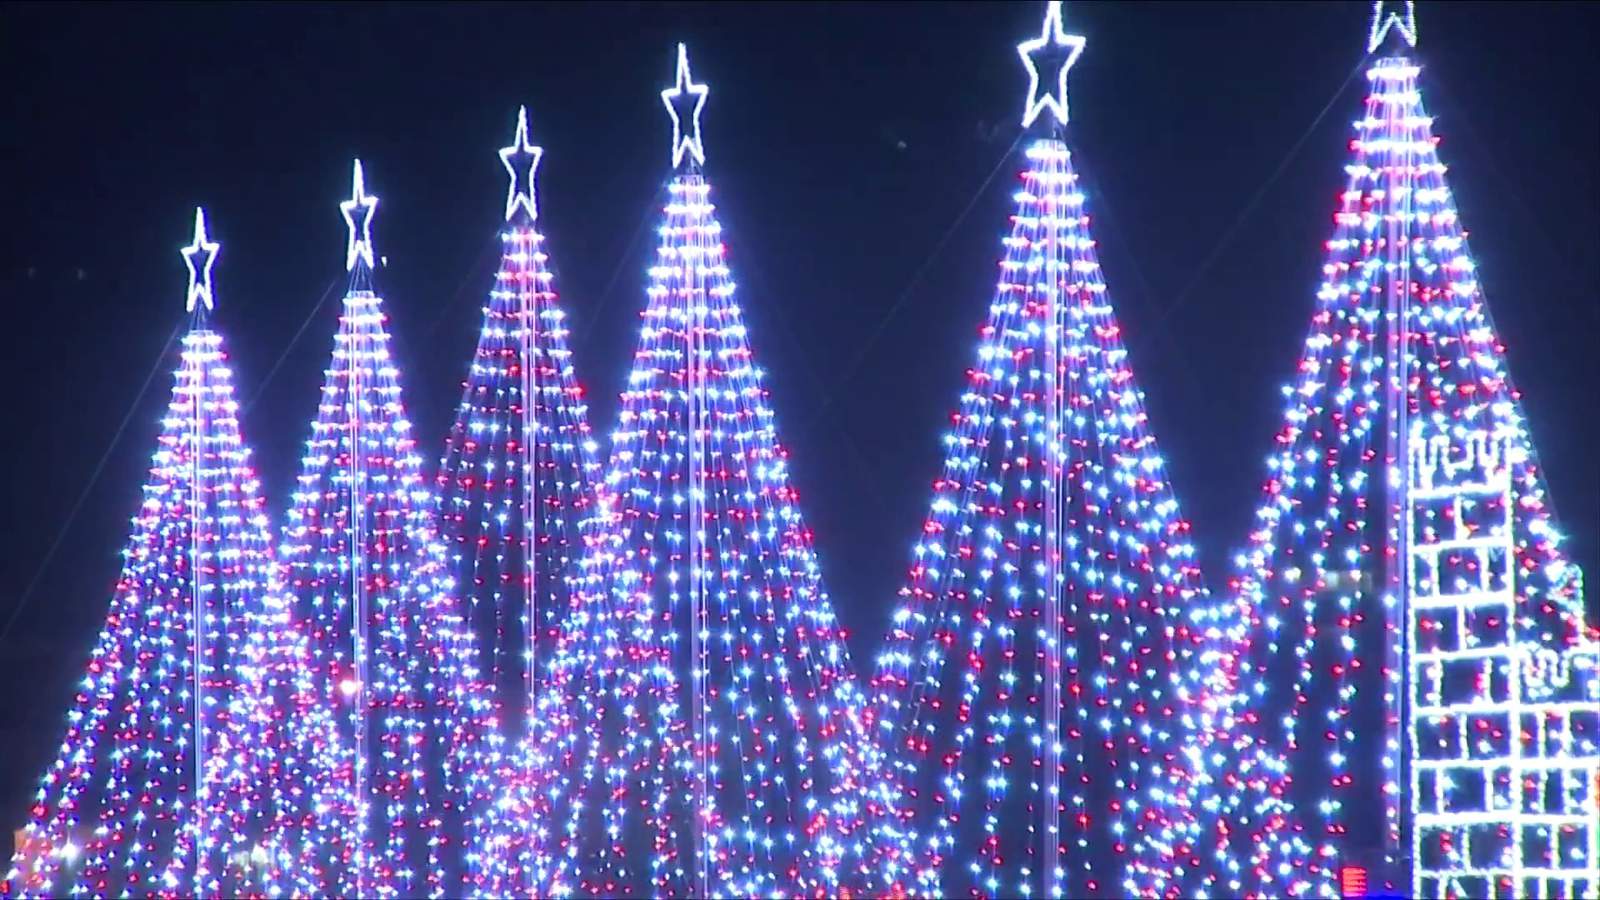 ‘2020′s been rough’: Galax lights show brings holiday spirit to community